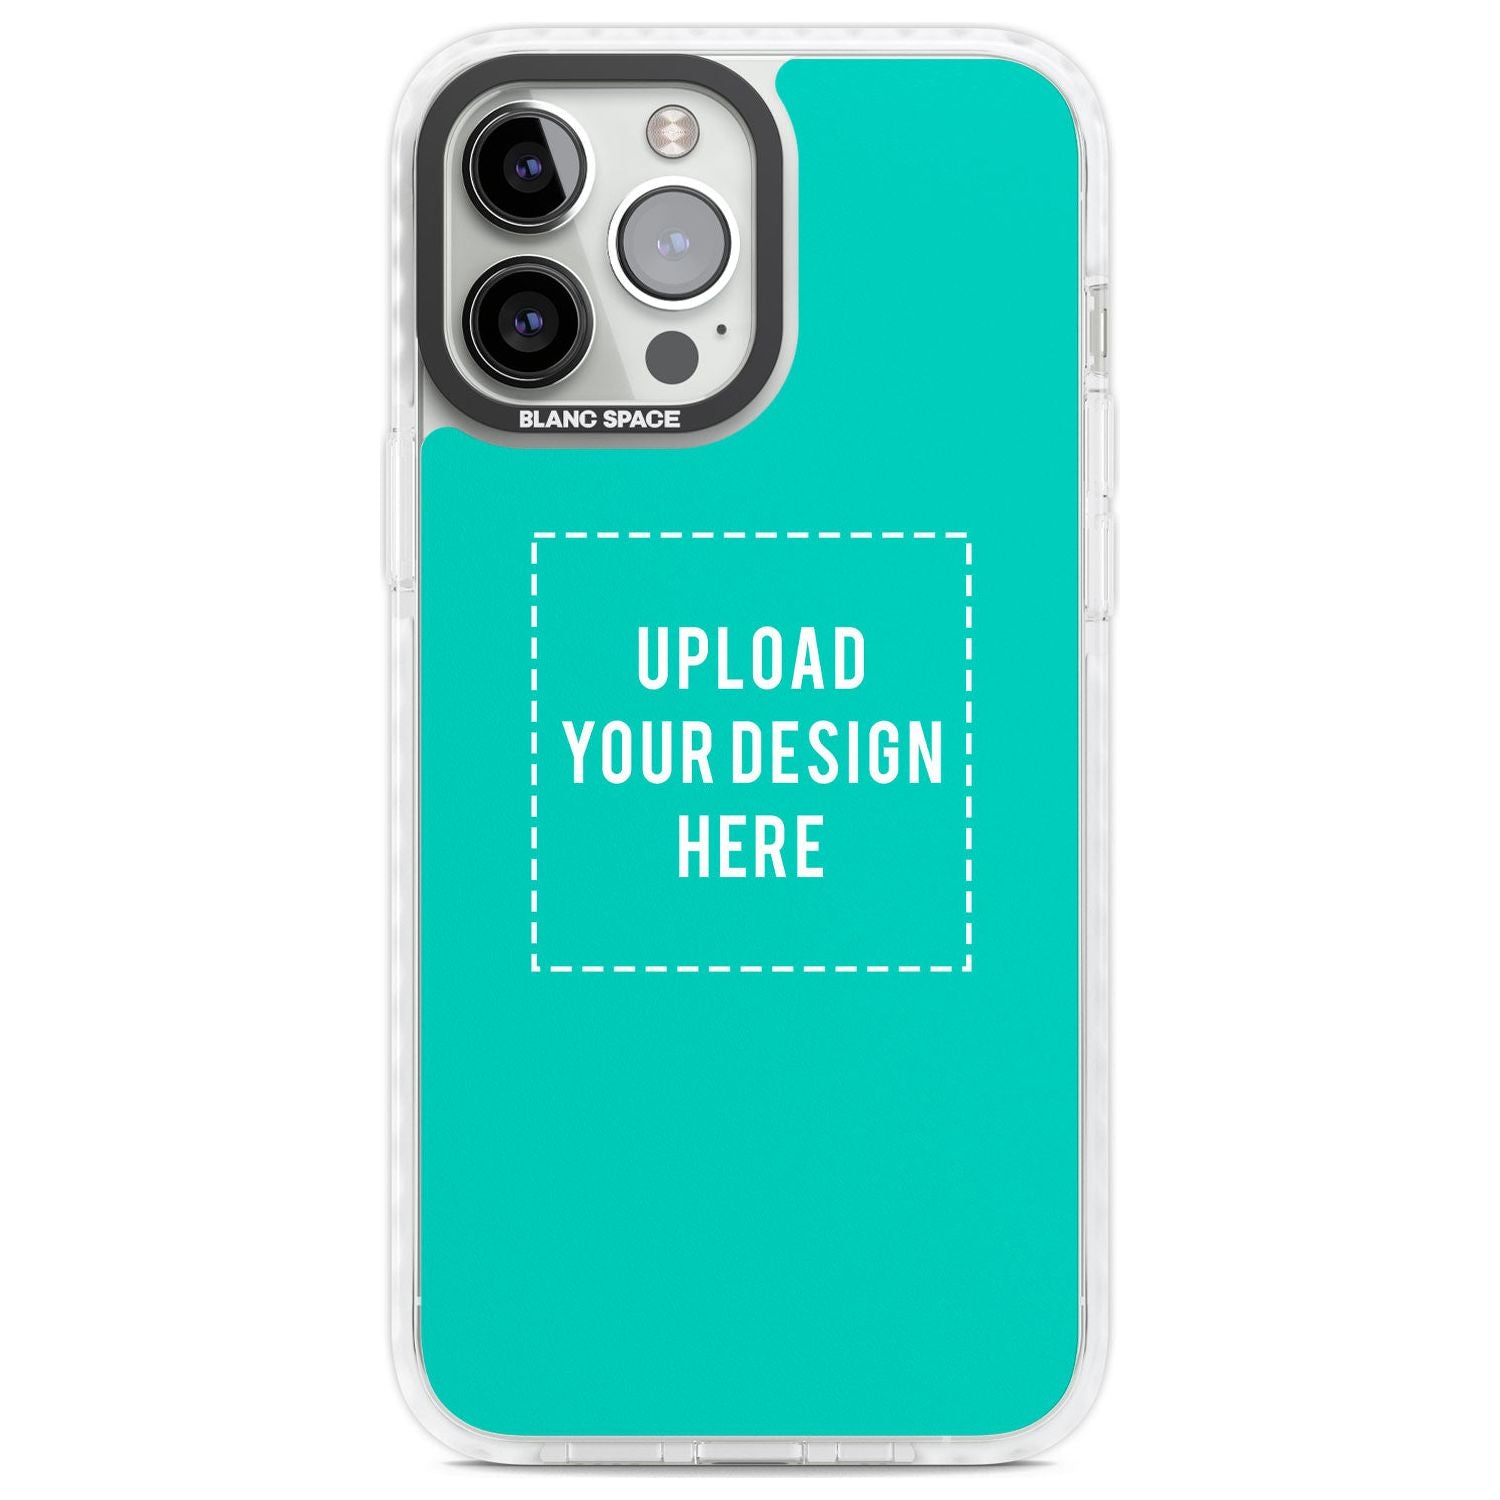 Personalise Your Own Design Custom Phone Case iPhone 13 Pro Max / Impact Case,iPhone 14 Pro Max / Impact Case Blanc Space